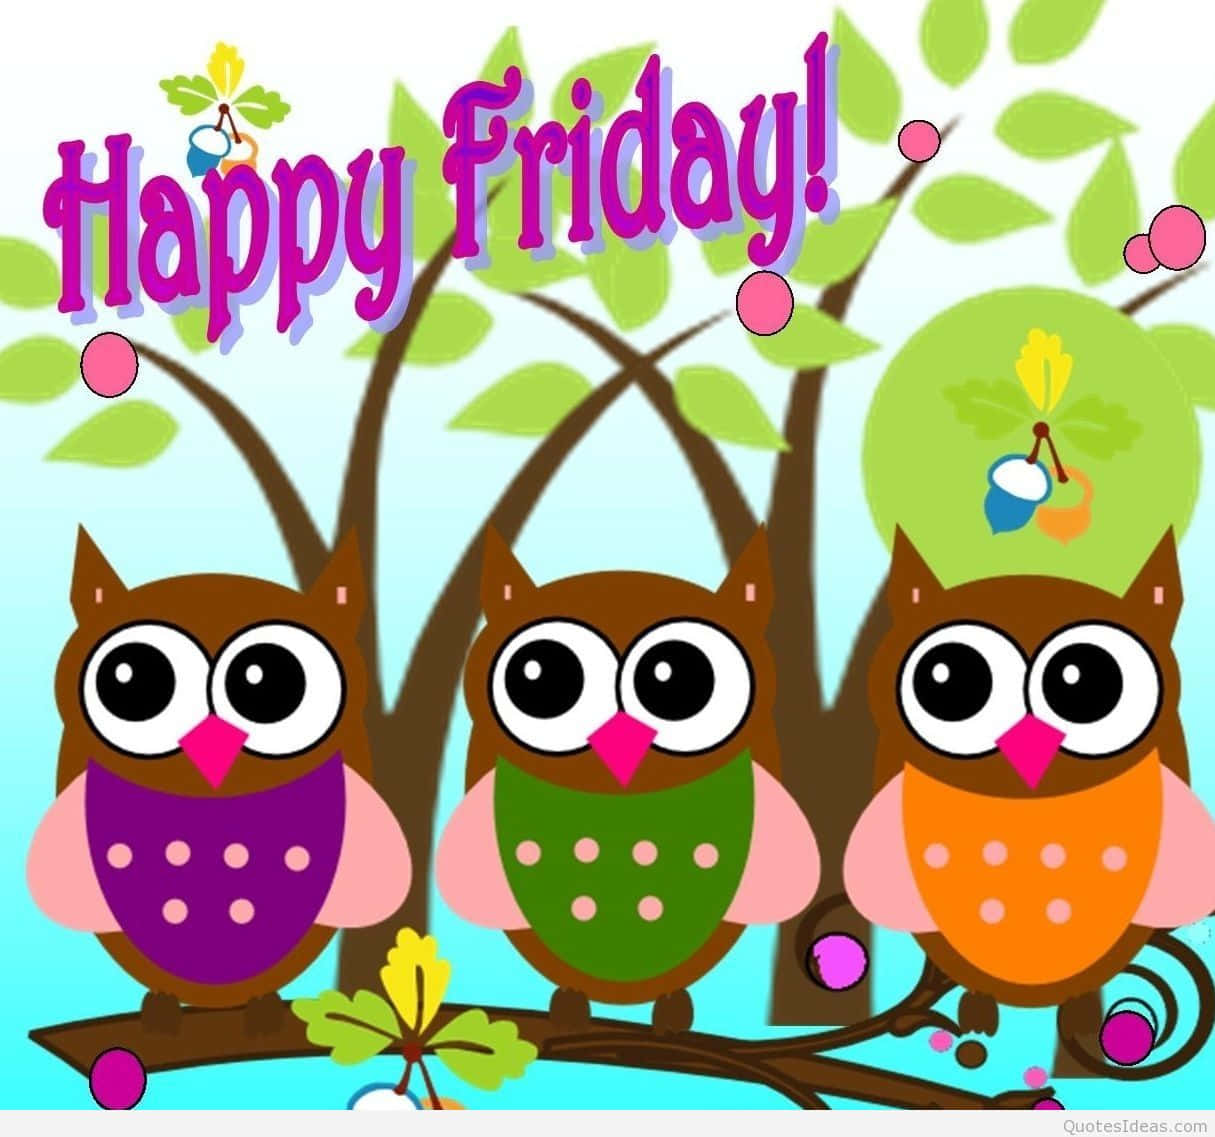 Happy Friday Owls With A Branch And The Words Happy Friday Wallpaper